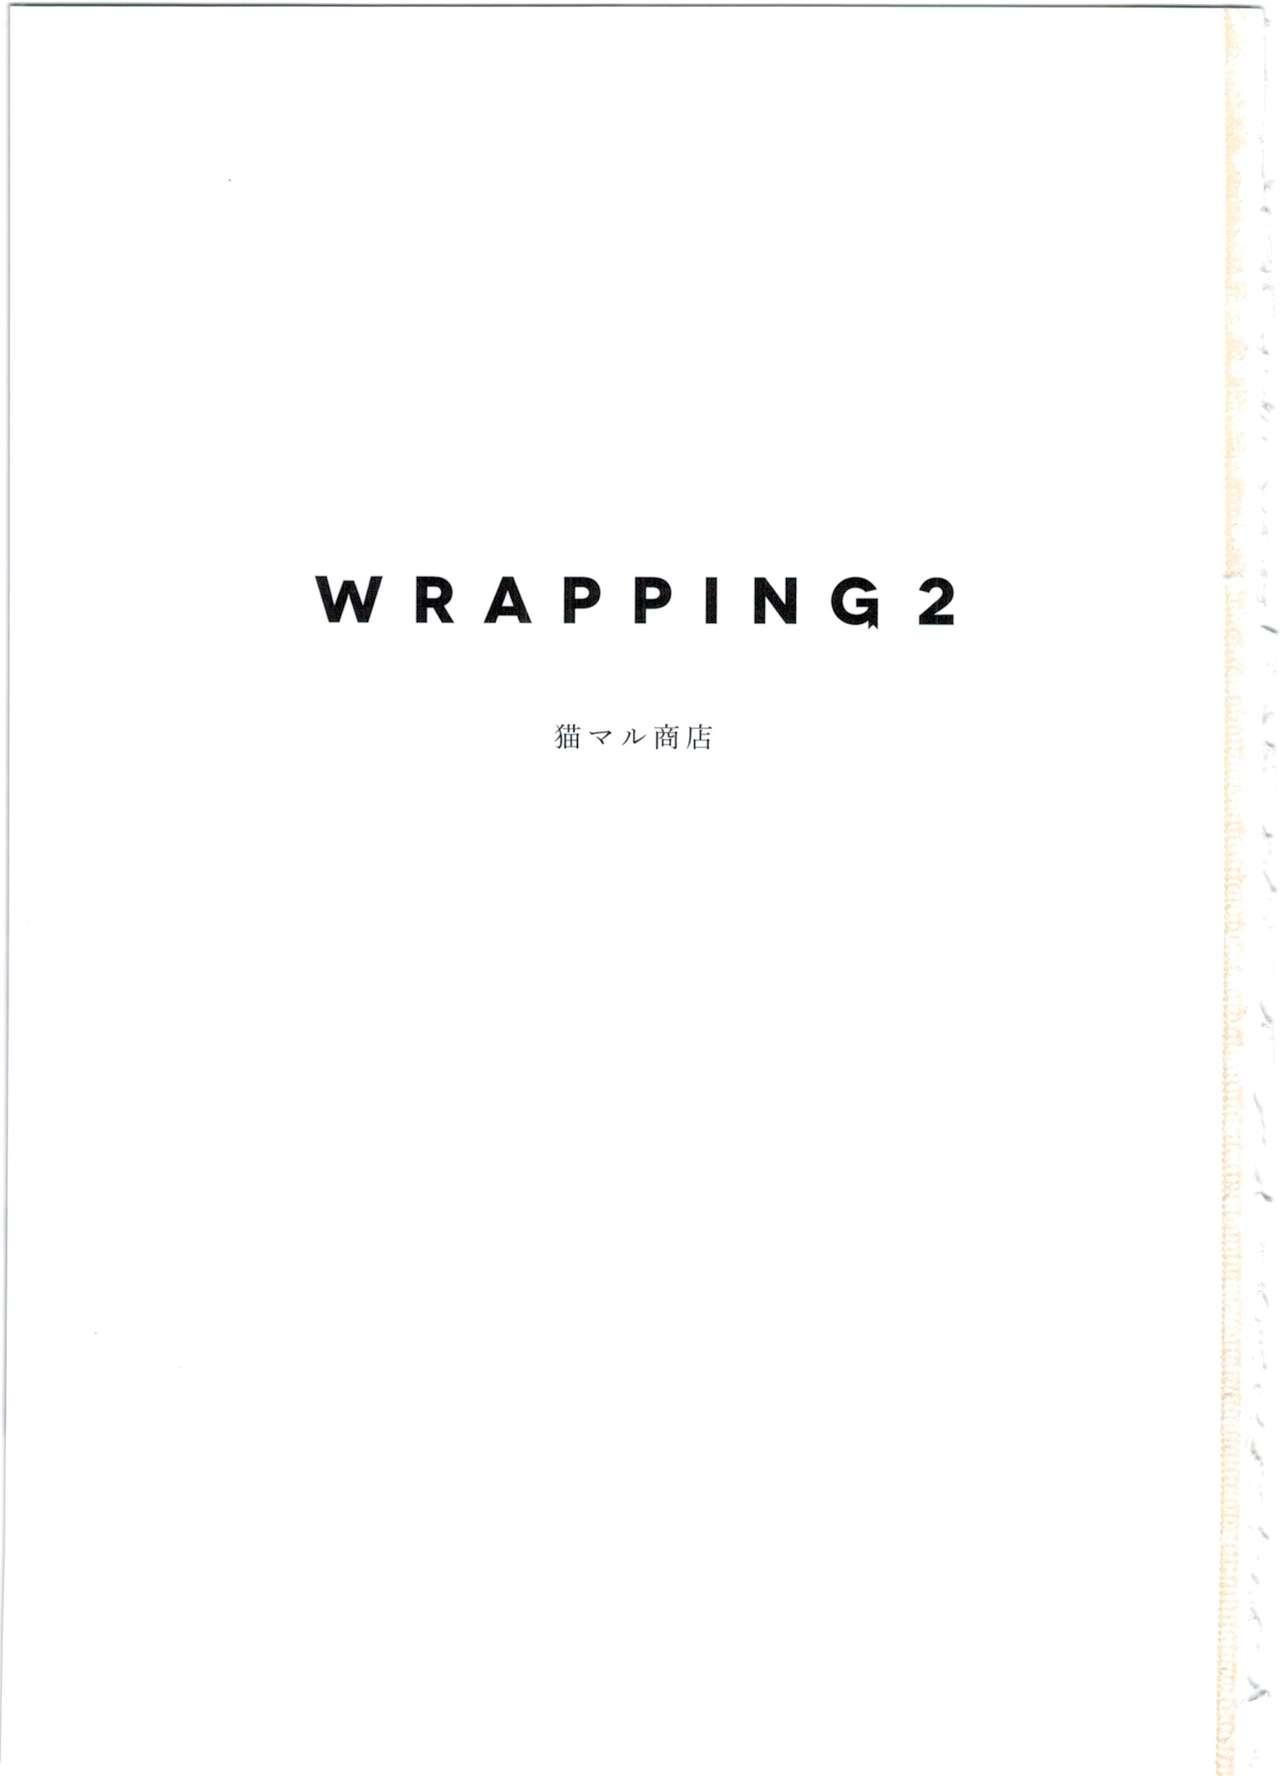 WRAPPING 2 2